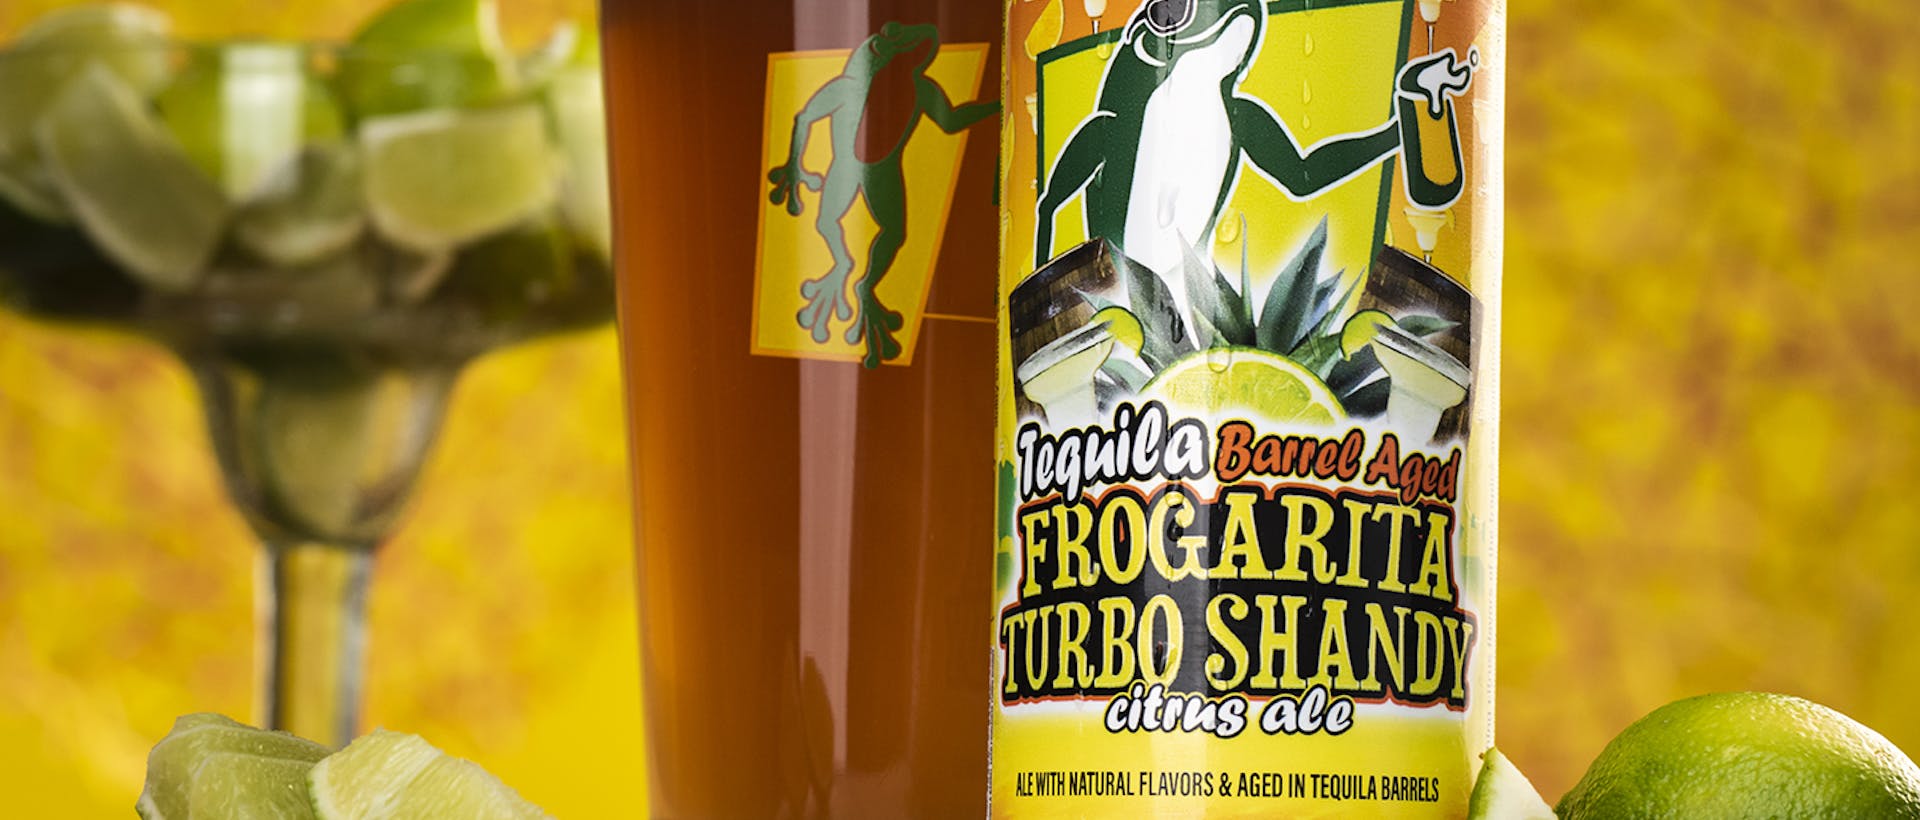 frogaritia turbo shandy beer can with limes